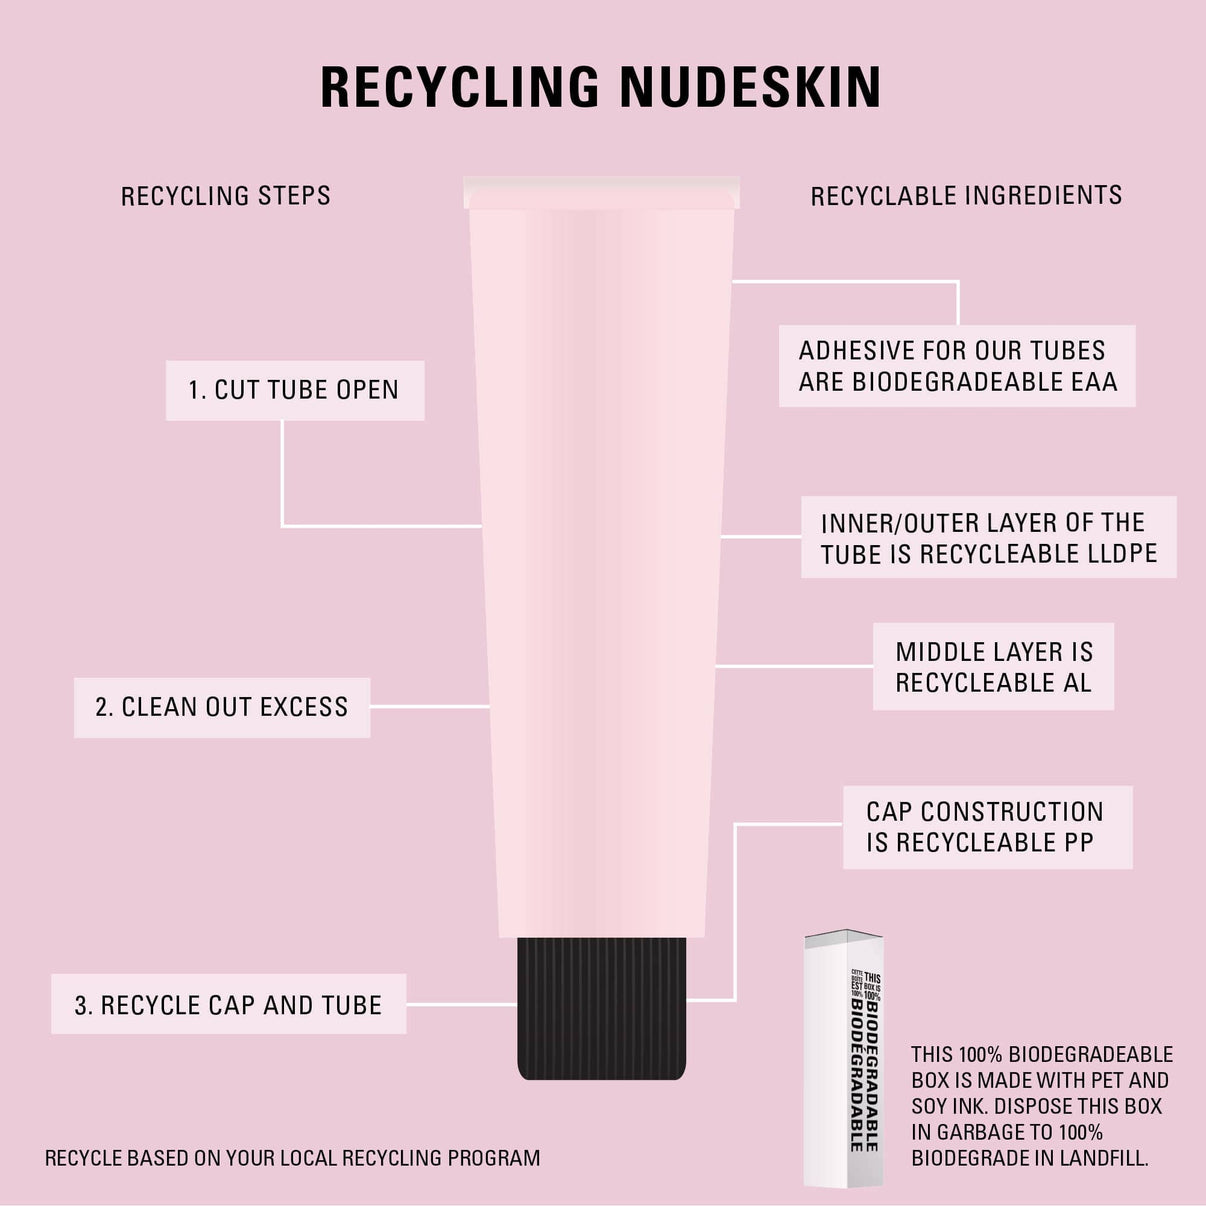 Recycling Nudeskin steps and ingredients